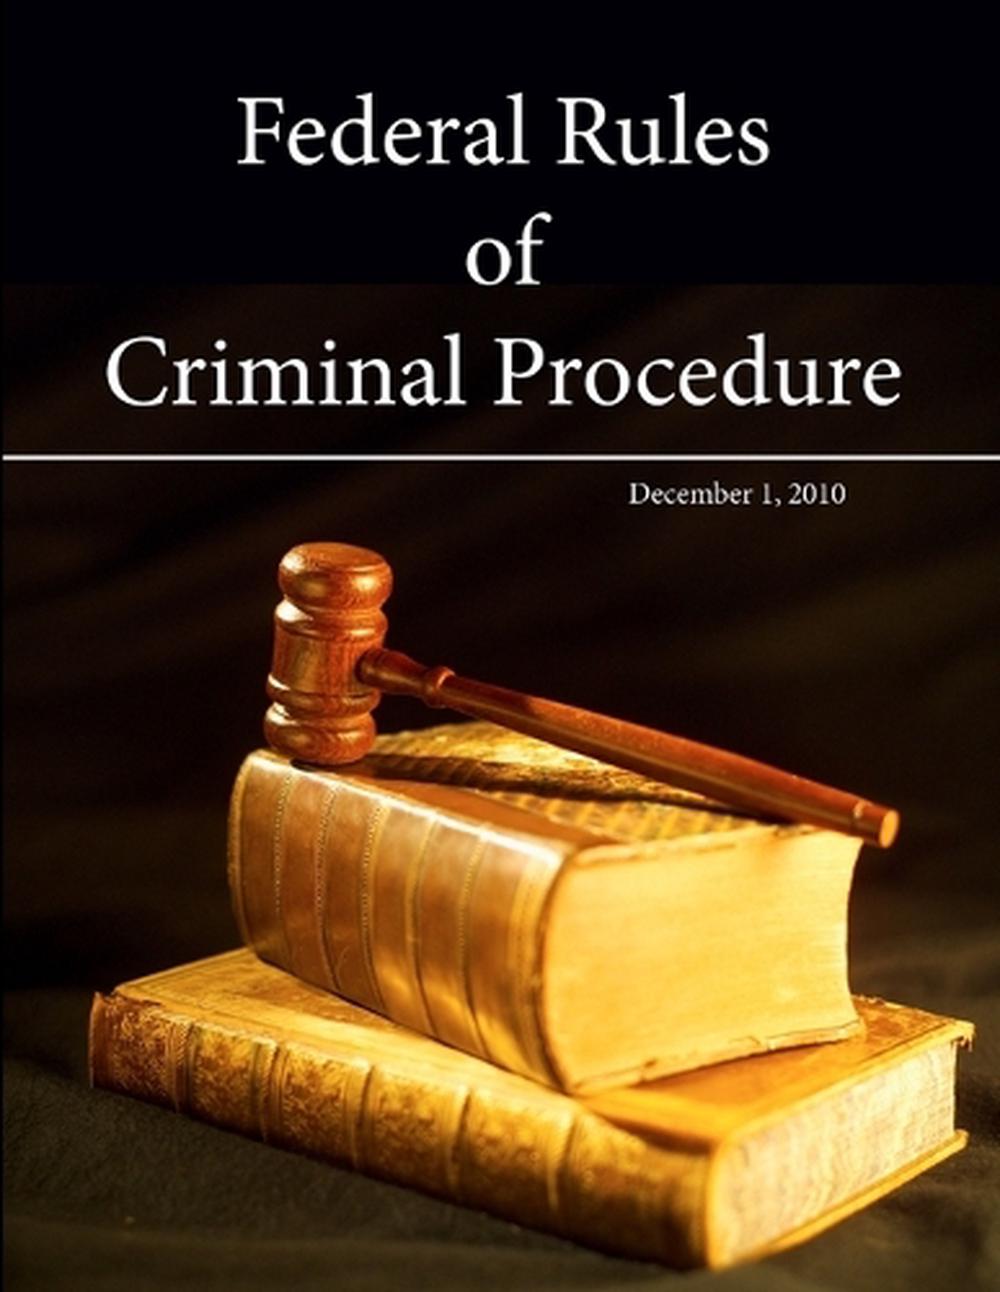 Federal Rules of Criminal Procedure December 1, 2010 by United States